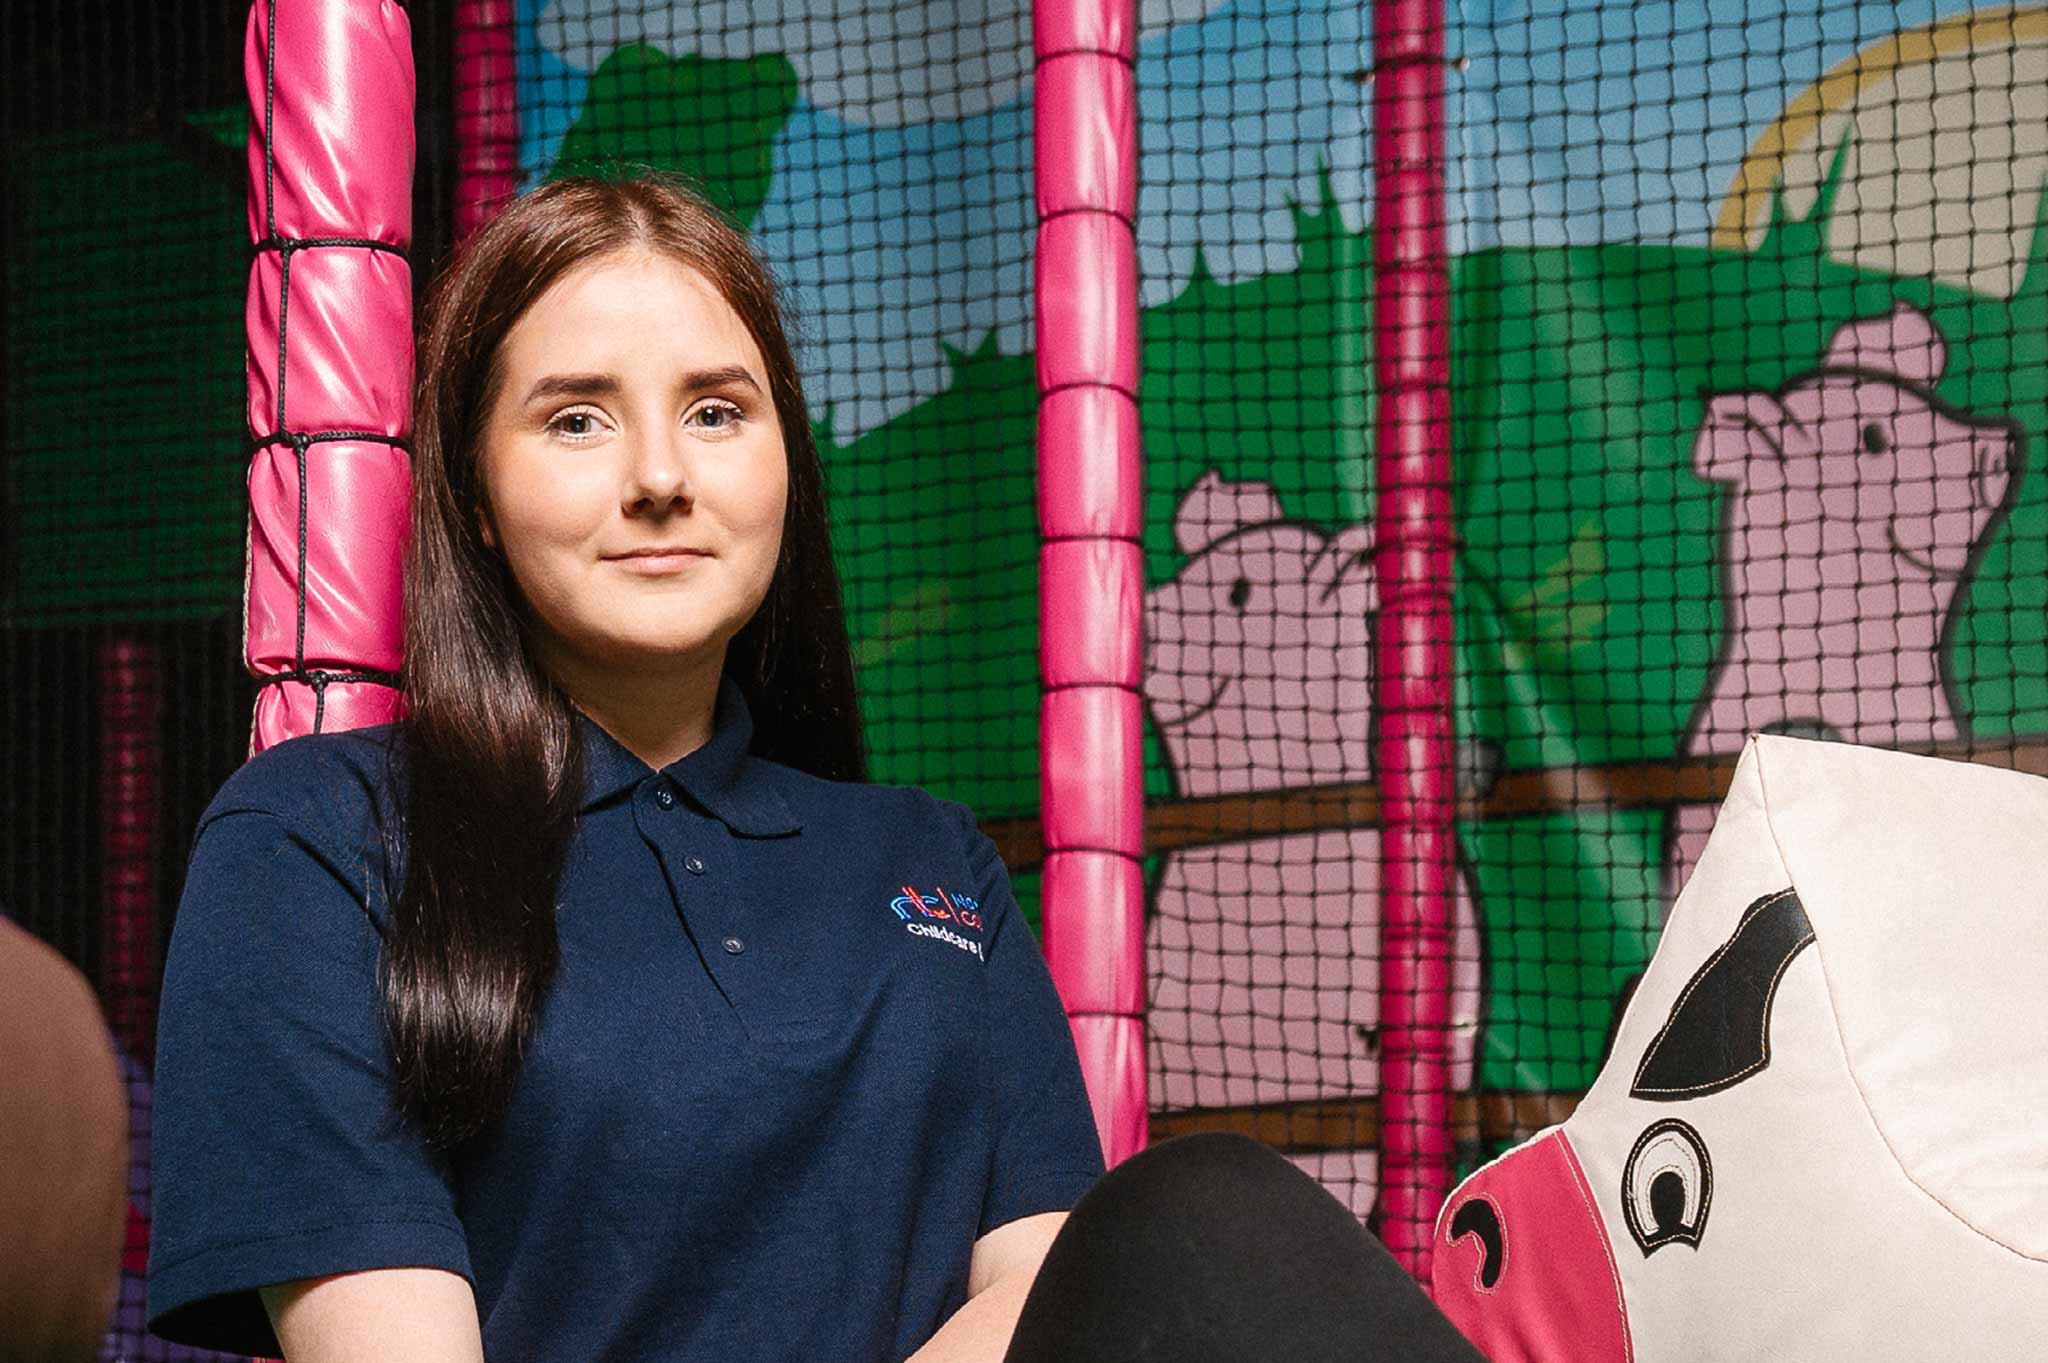 A student sits against brightly coloured soft play equipment, wearing a uniformed t-shirt and smiling to us